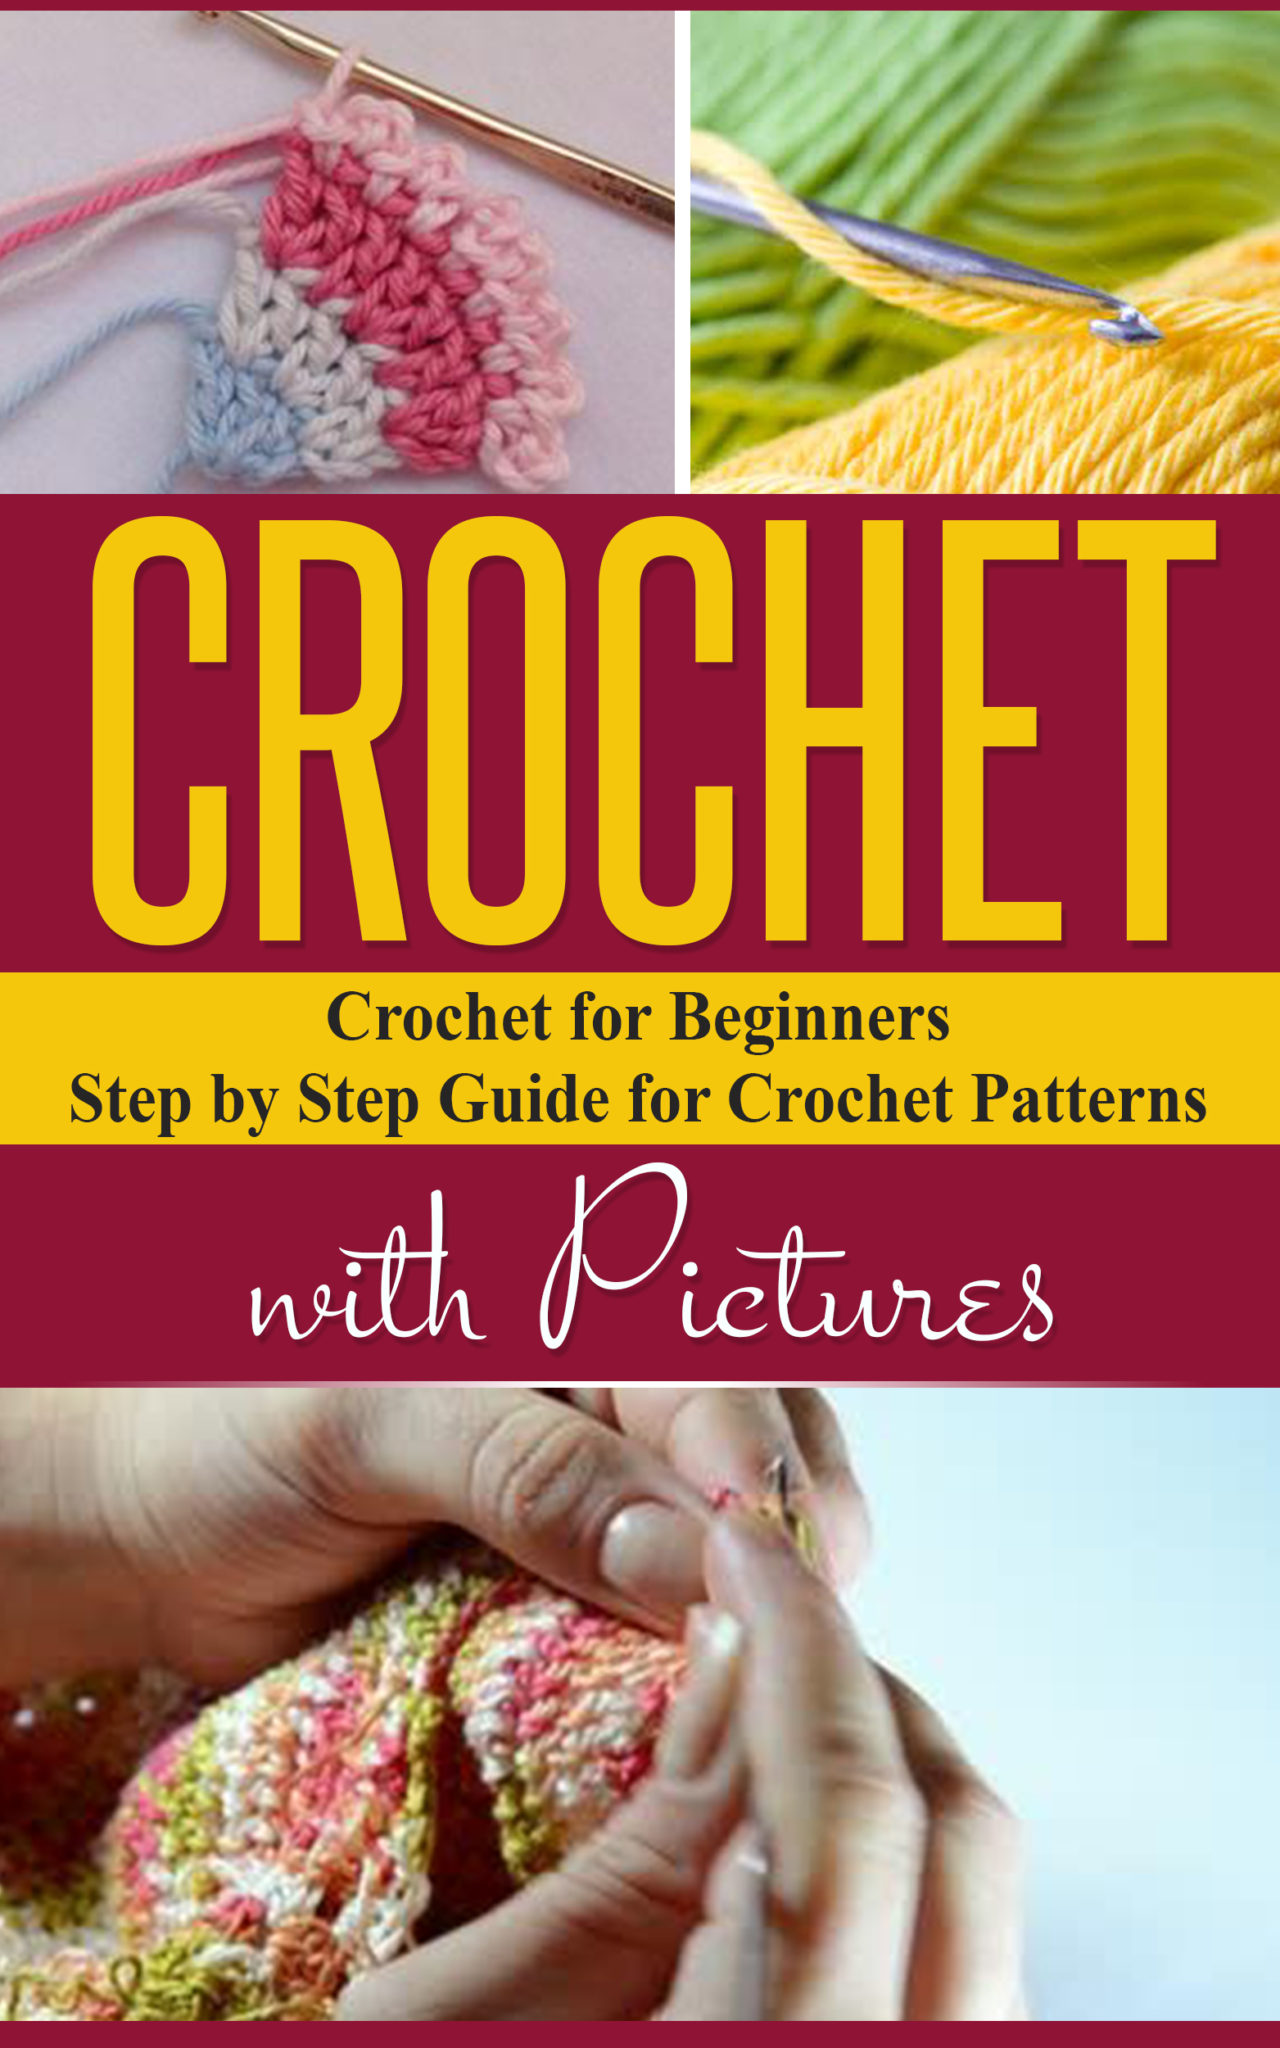 FREE: Crochet: Crochet for Beginners Step by Step Guide for Crochet Patterns with Pictures by Dorothy Smith